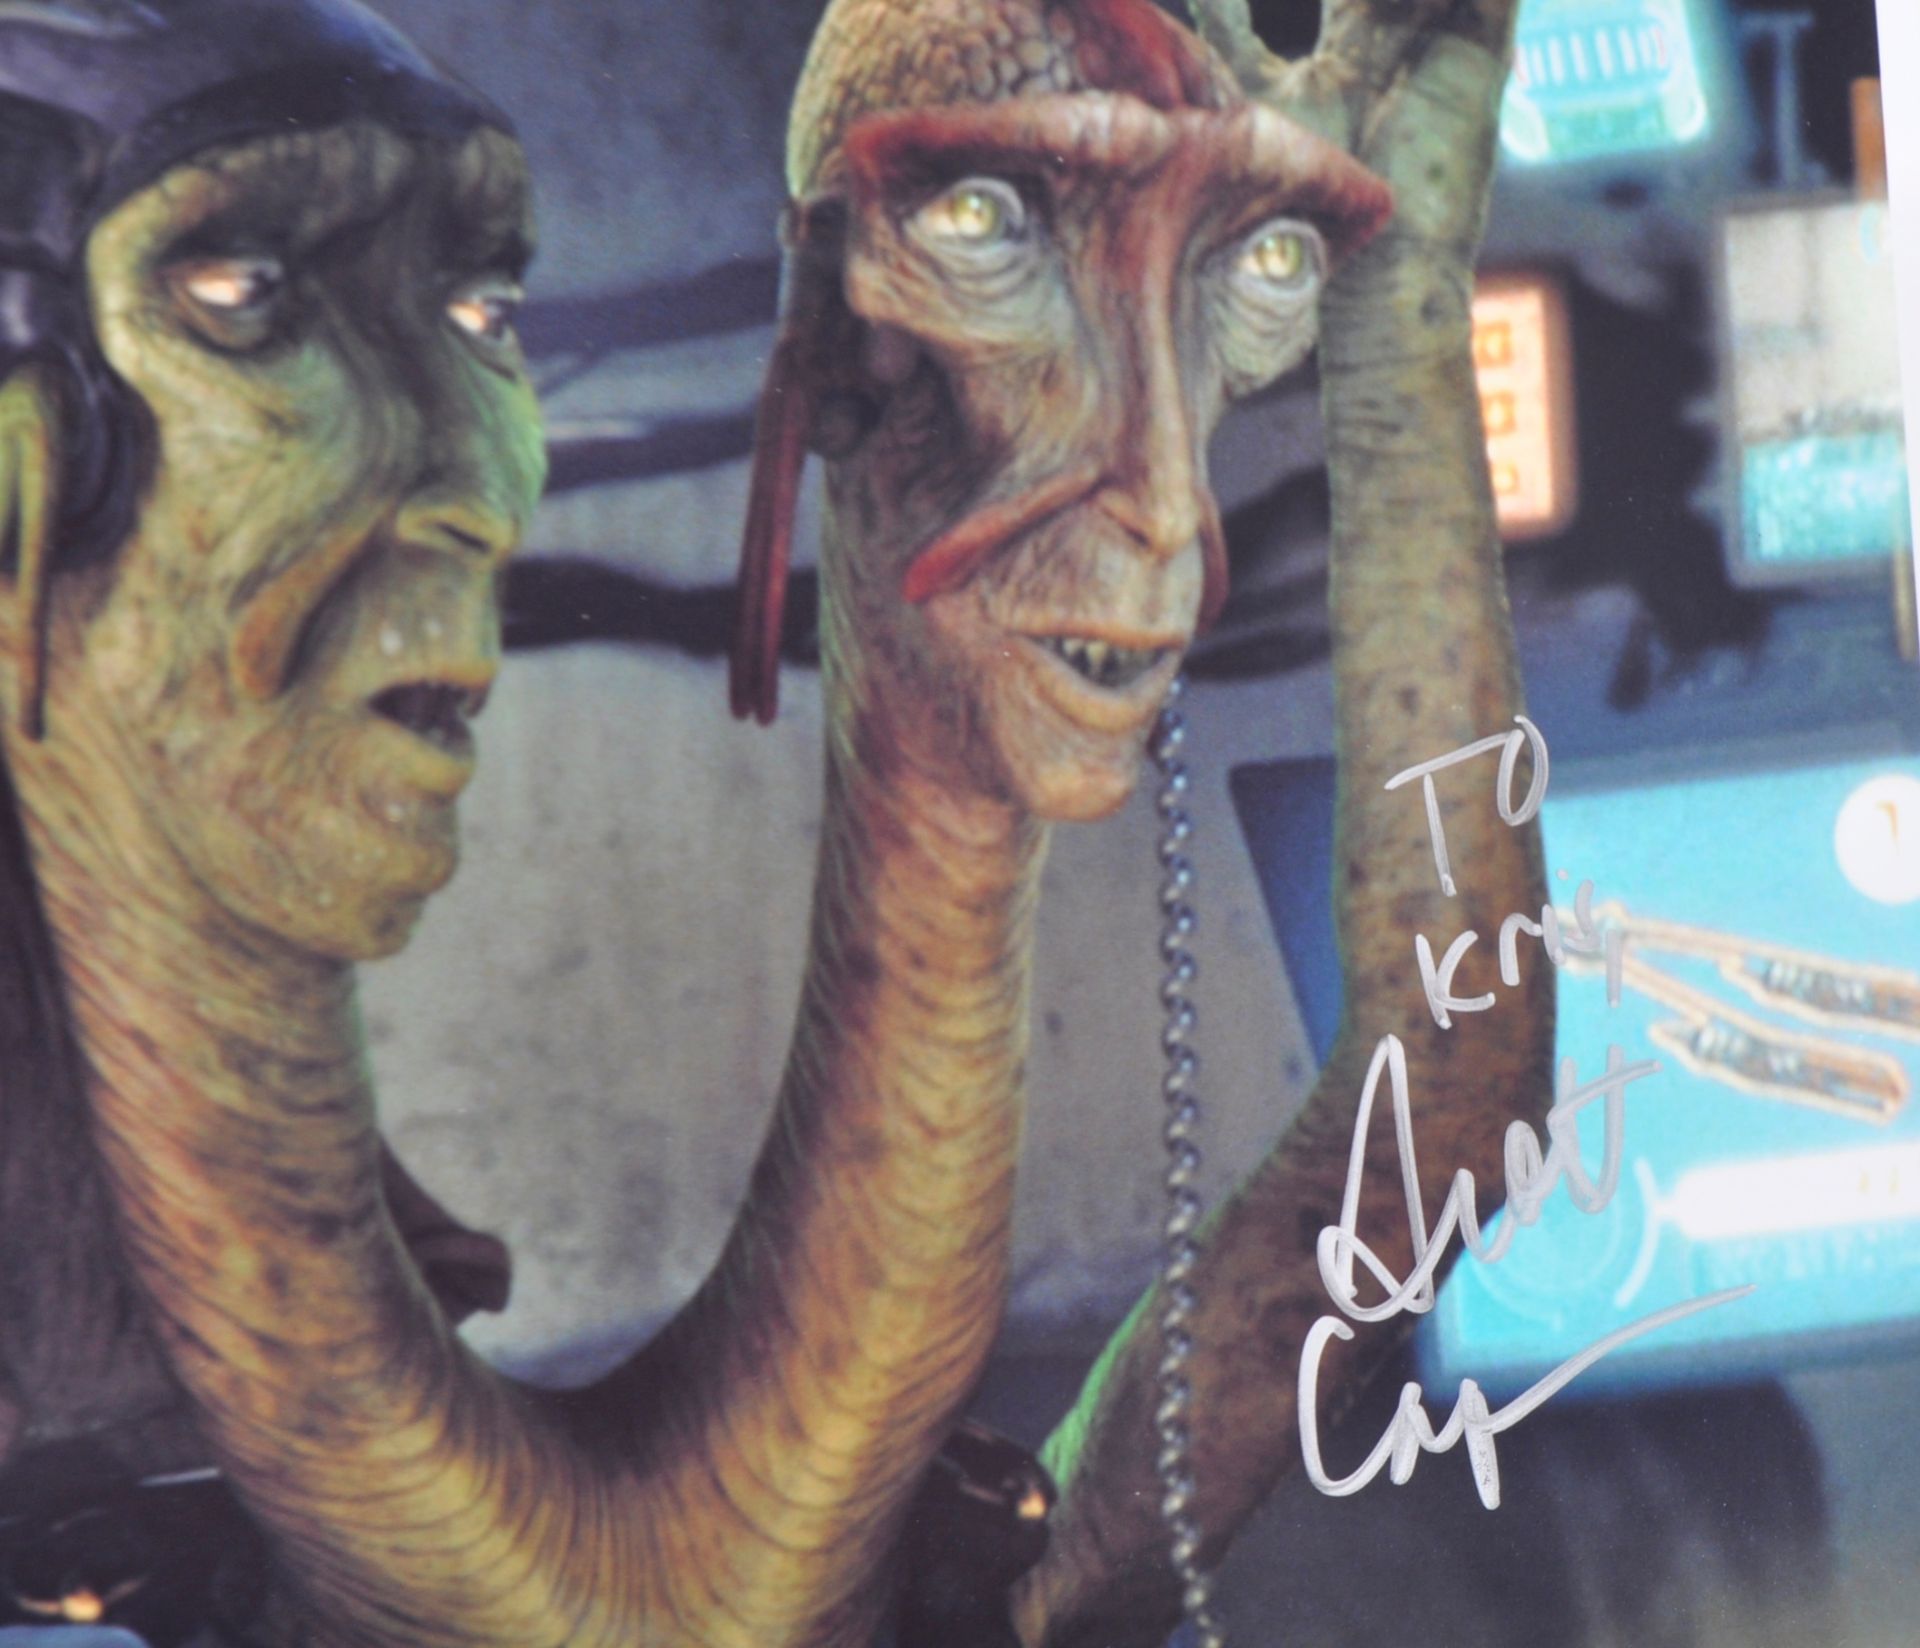 STAR WARS - THE PHANTOM MENACE - SIGNED OFFICIAL PIX COLLECTION - Image 7 of 8